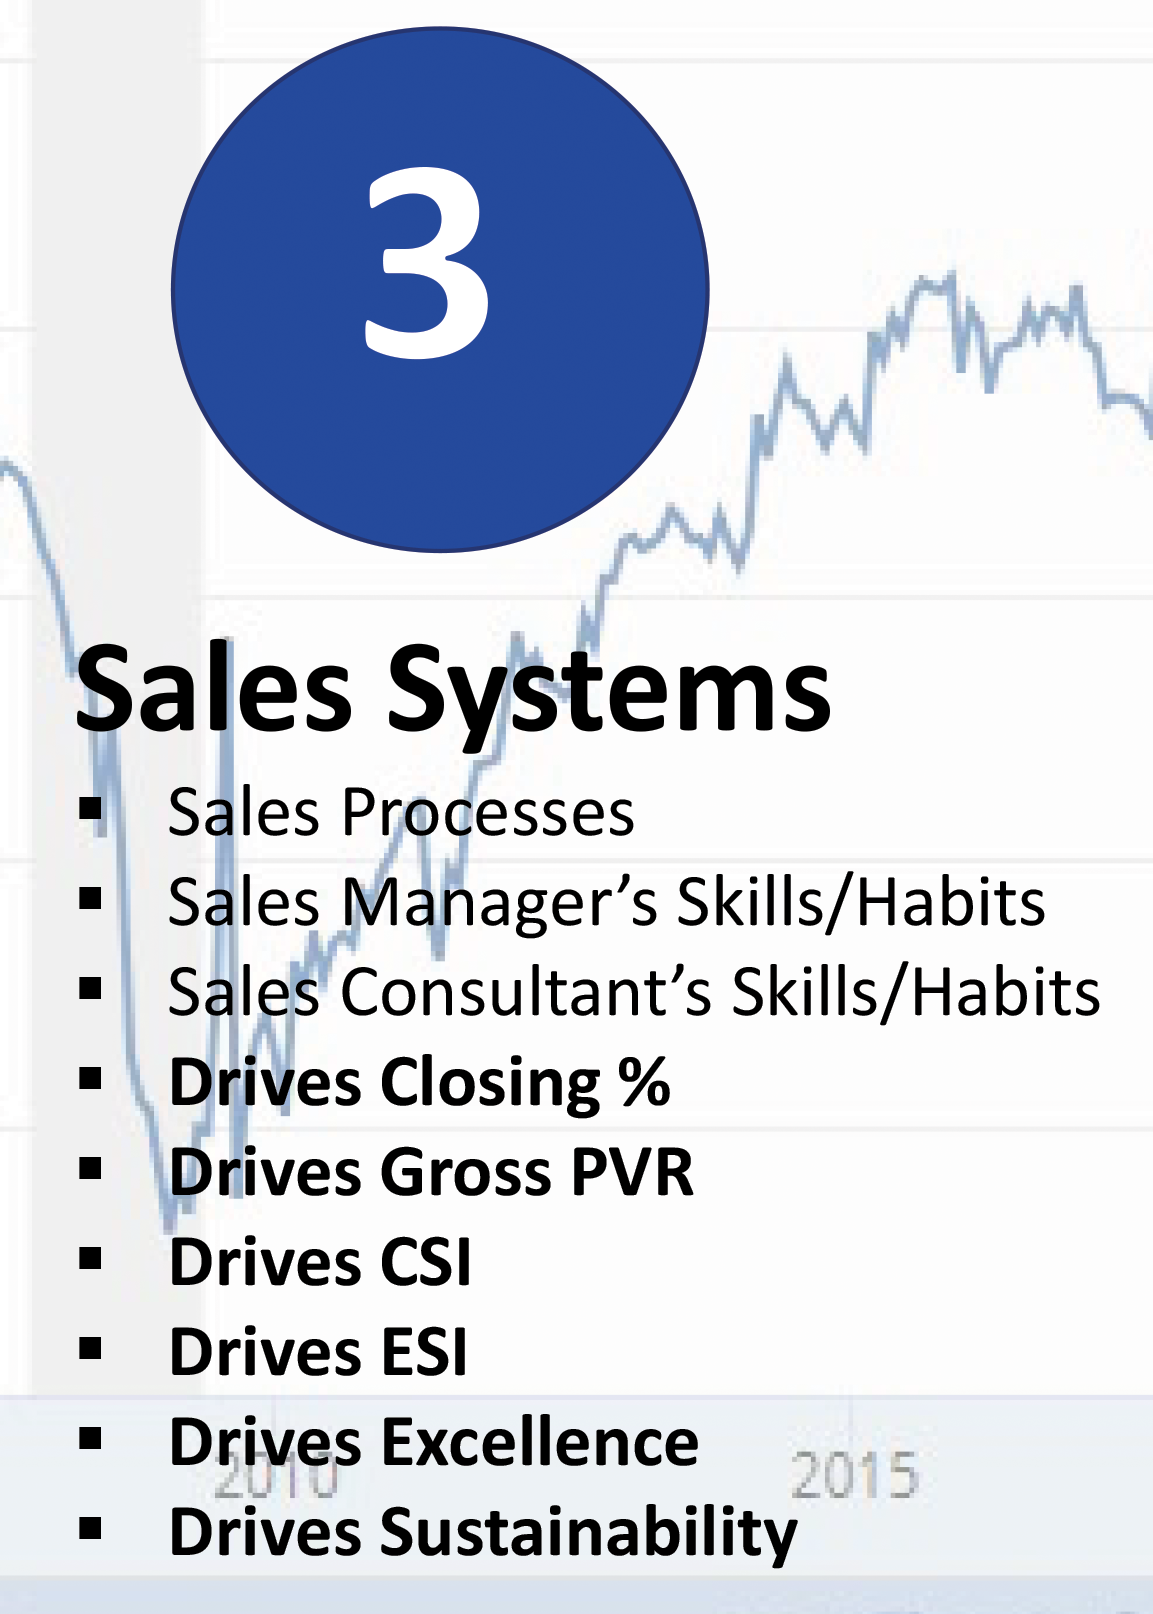 Sales systems are completely within your control and they include Sales processes, sales managements skills & habits, sales consultants skills & habits. Improve these with car sales training. Sales Systems drive closing percentage, gross PVR, Customer Satisfaction, Employee Satisfaction and can give your business a level of sustainability and resilience more than any other factor.